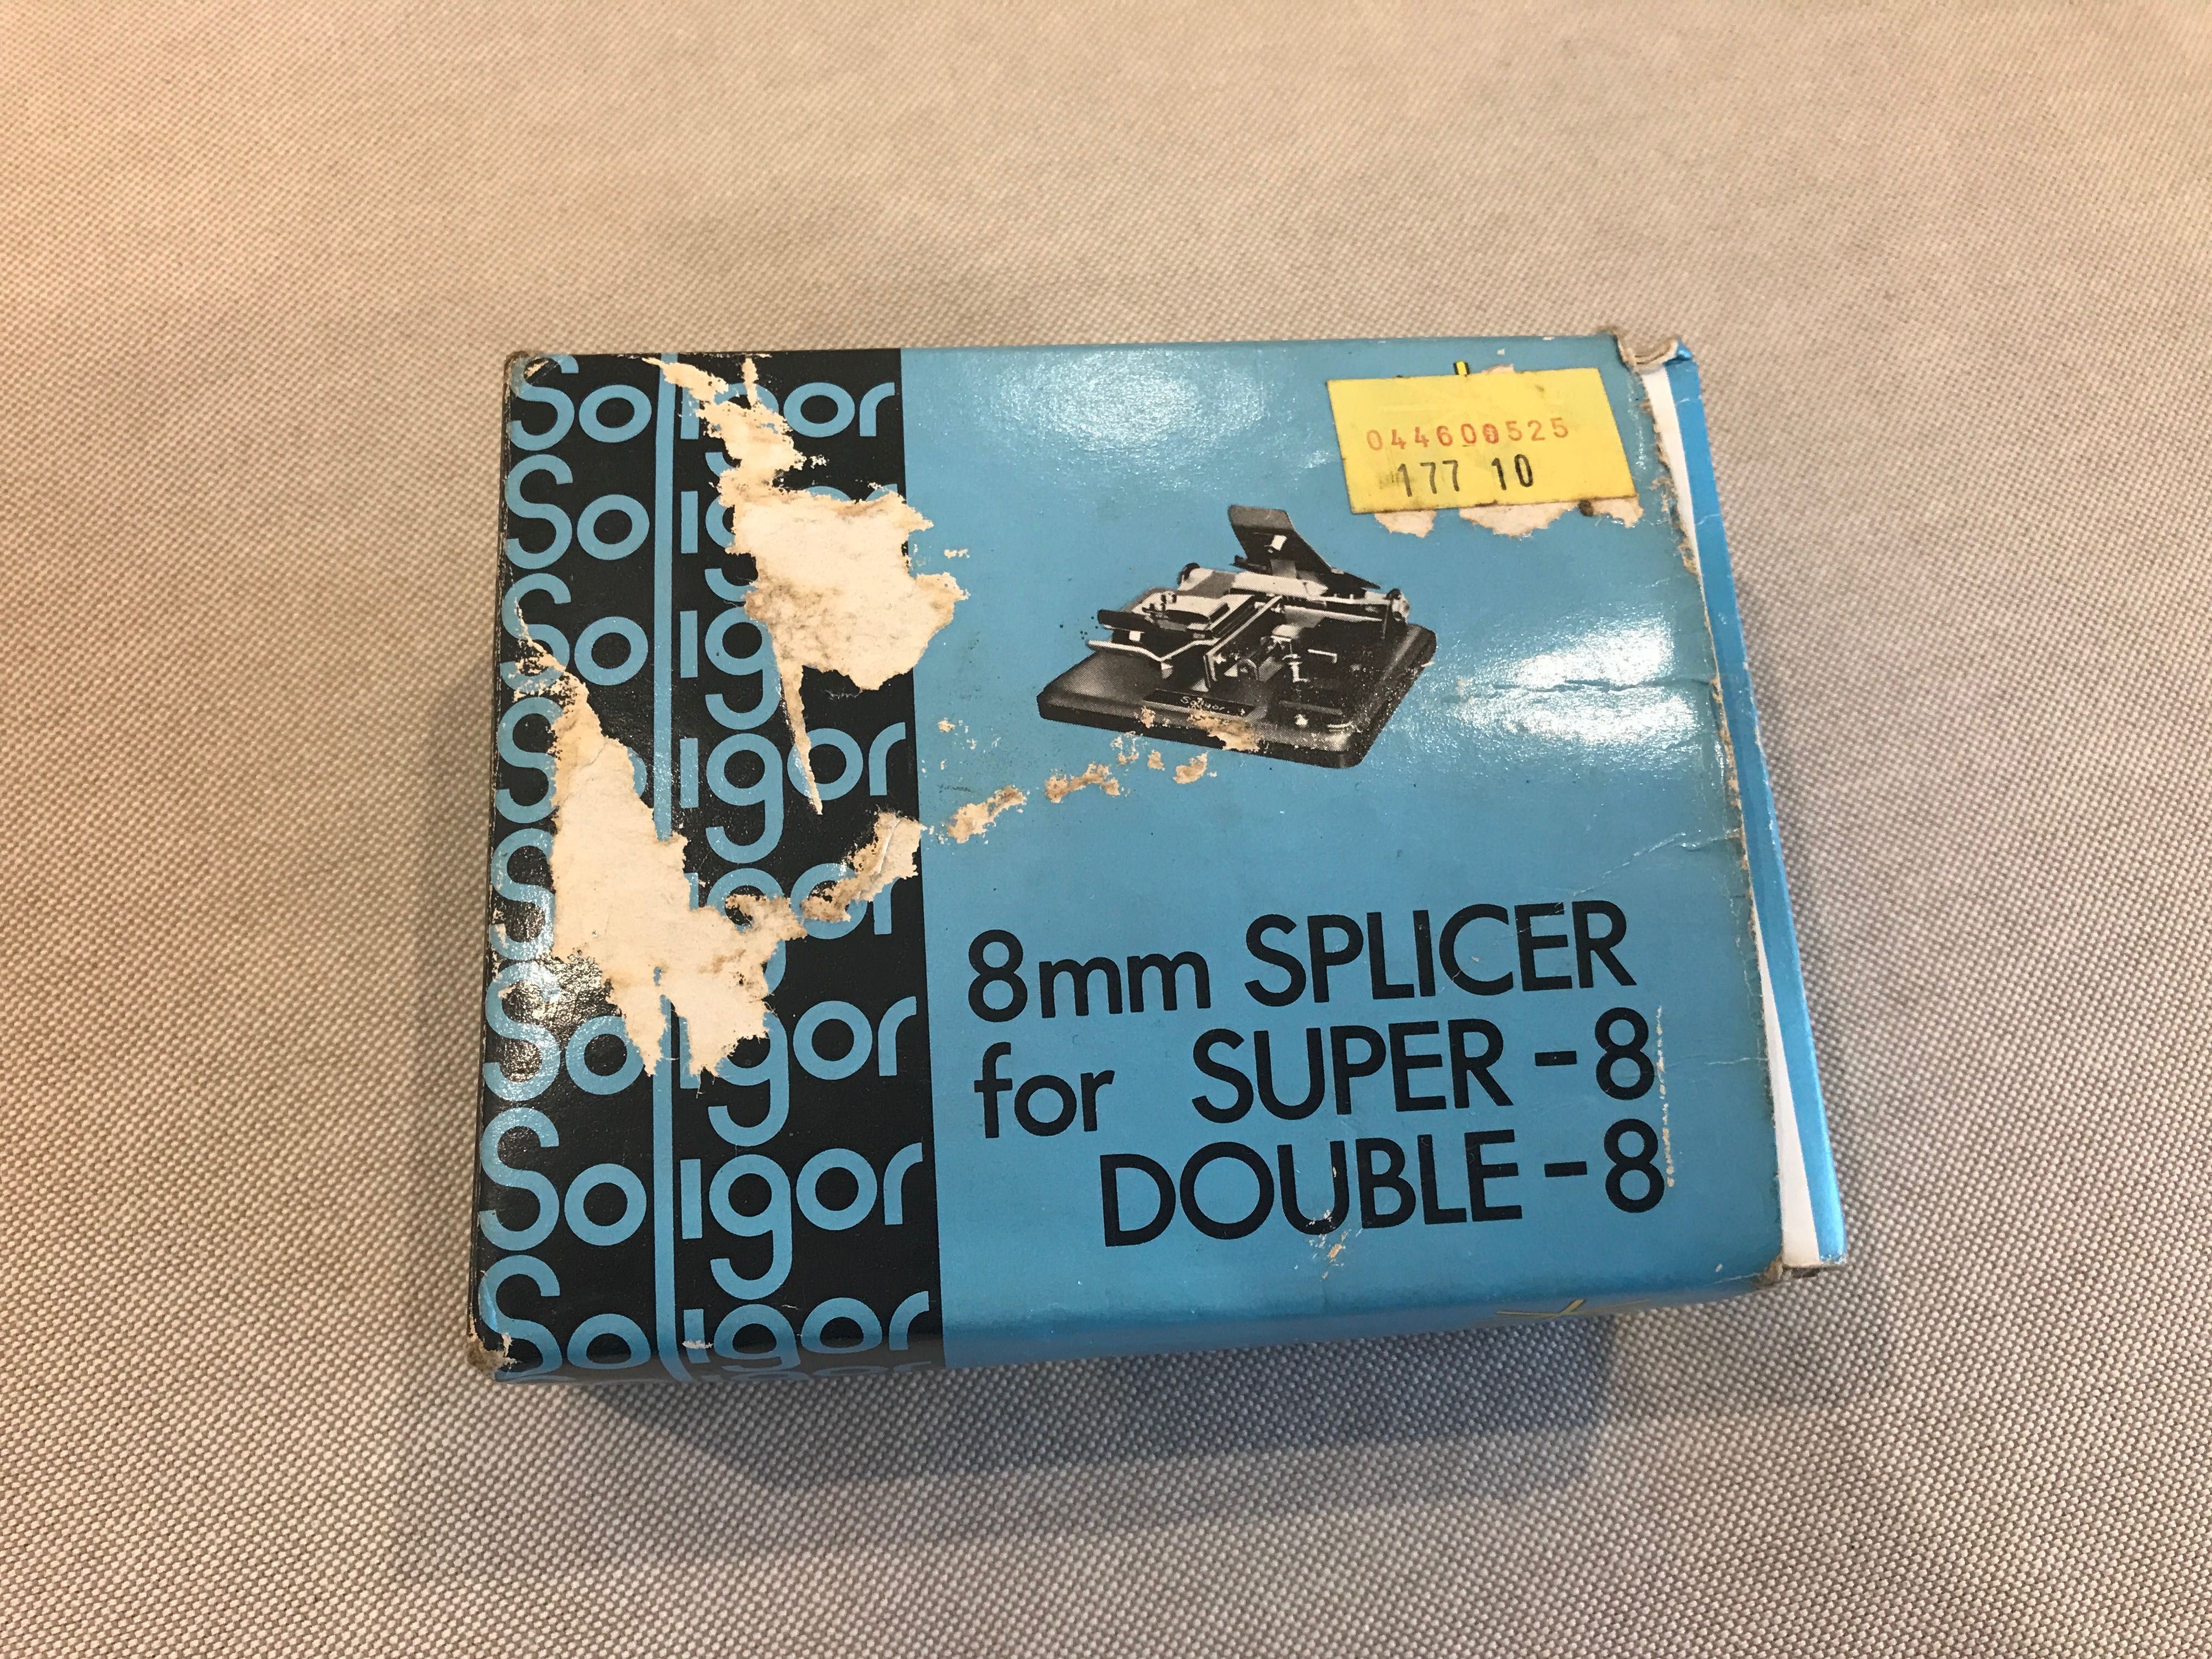 8mm SPLICER for SUPER-8 (double)